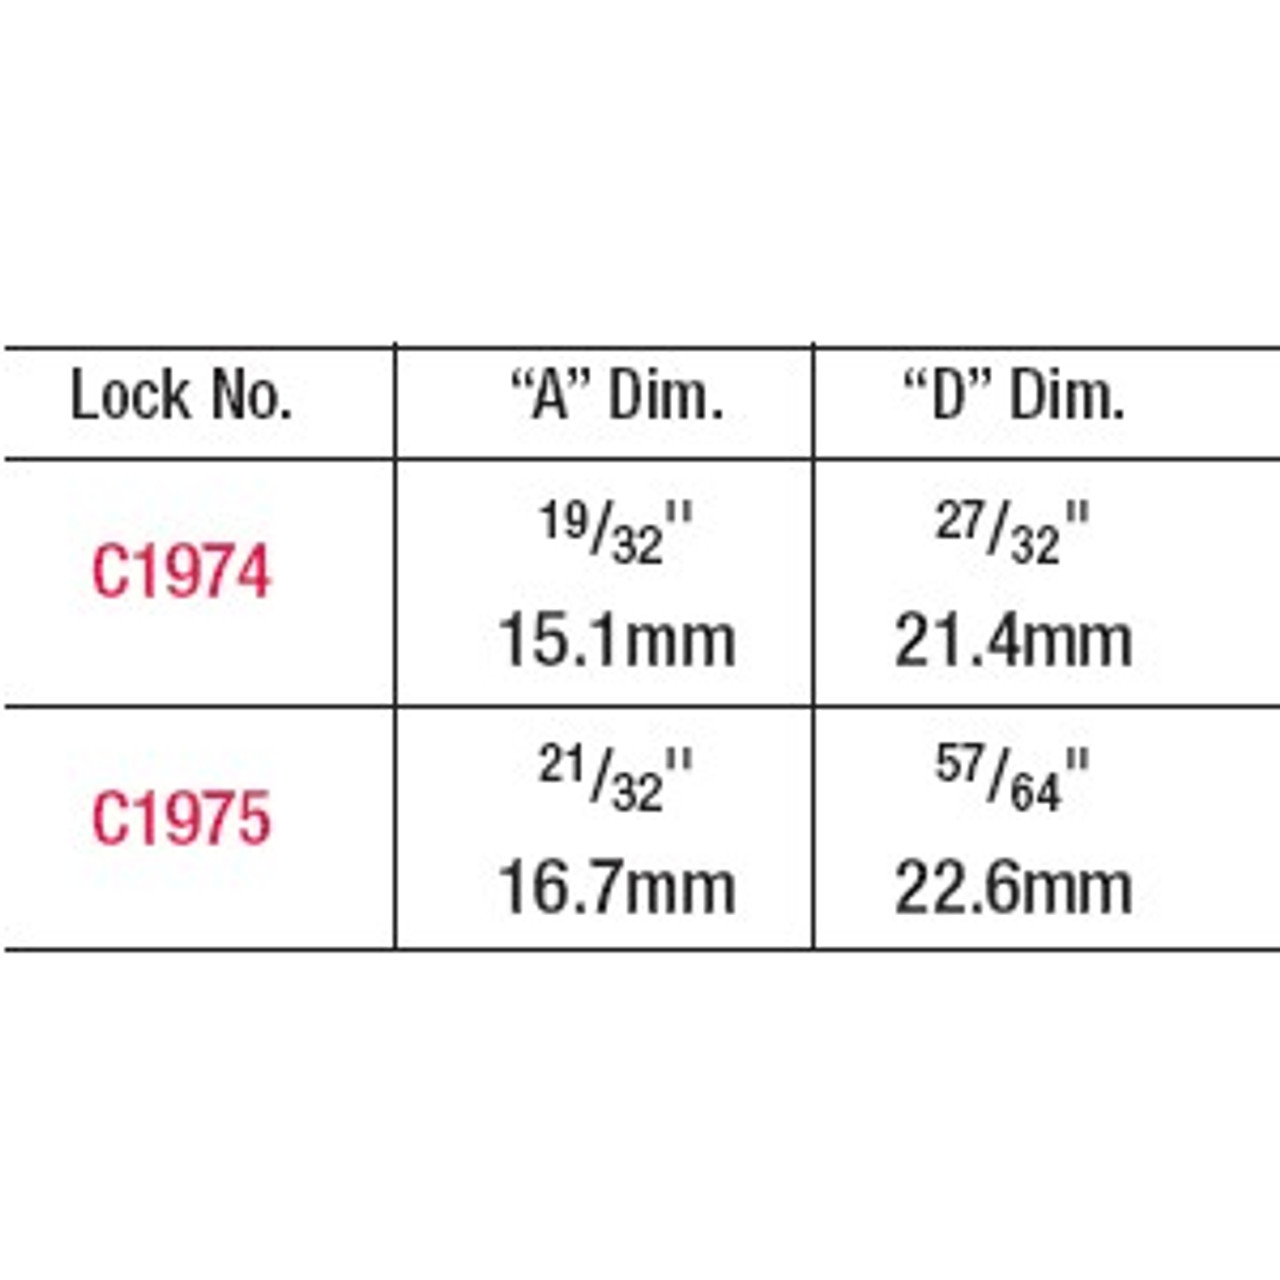 CompX Chicago 4K93 Replacement Key, 2K01 - 7K97 Lock Series